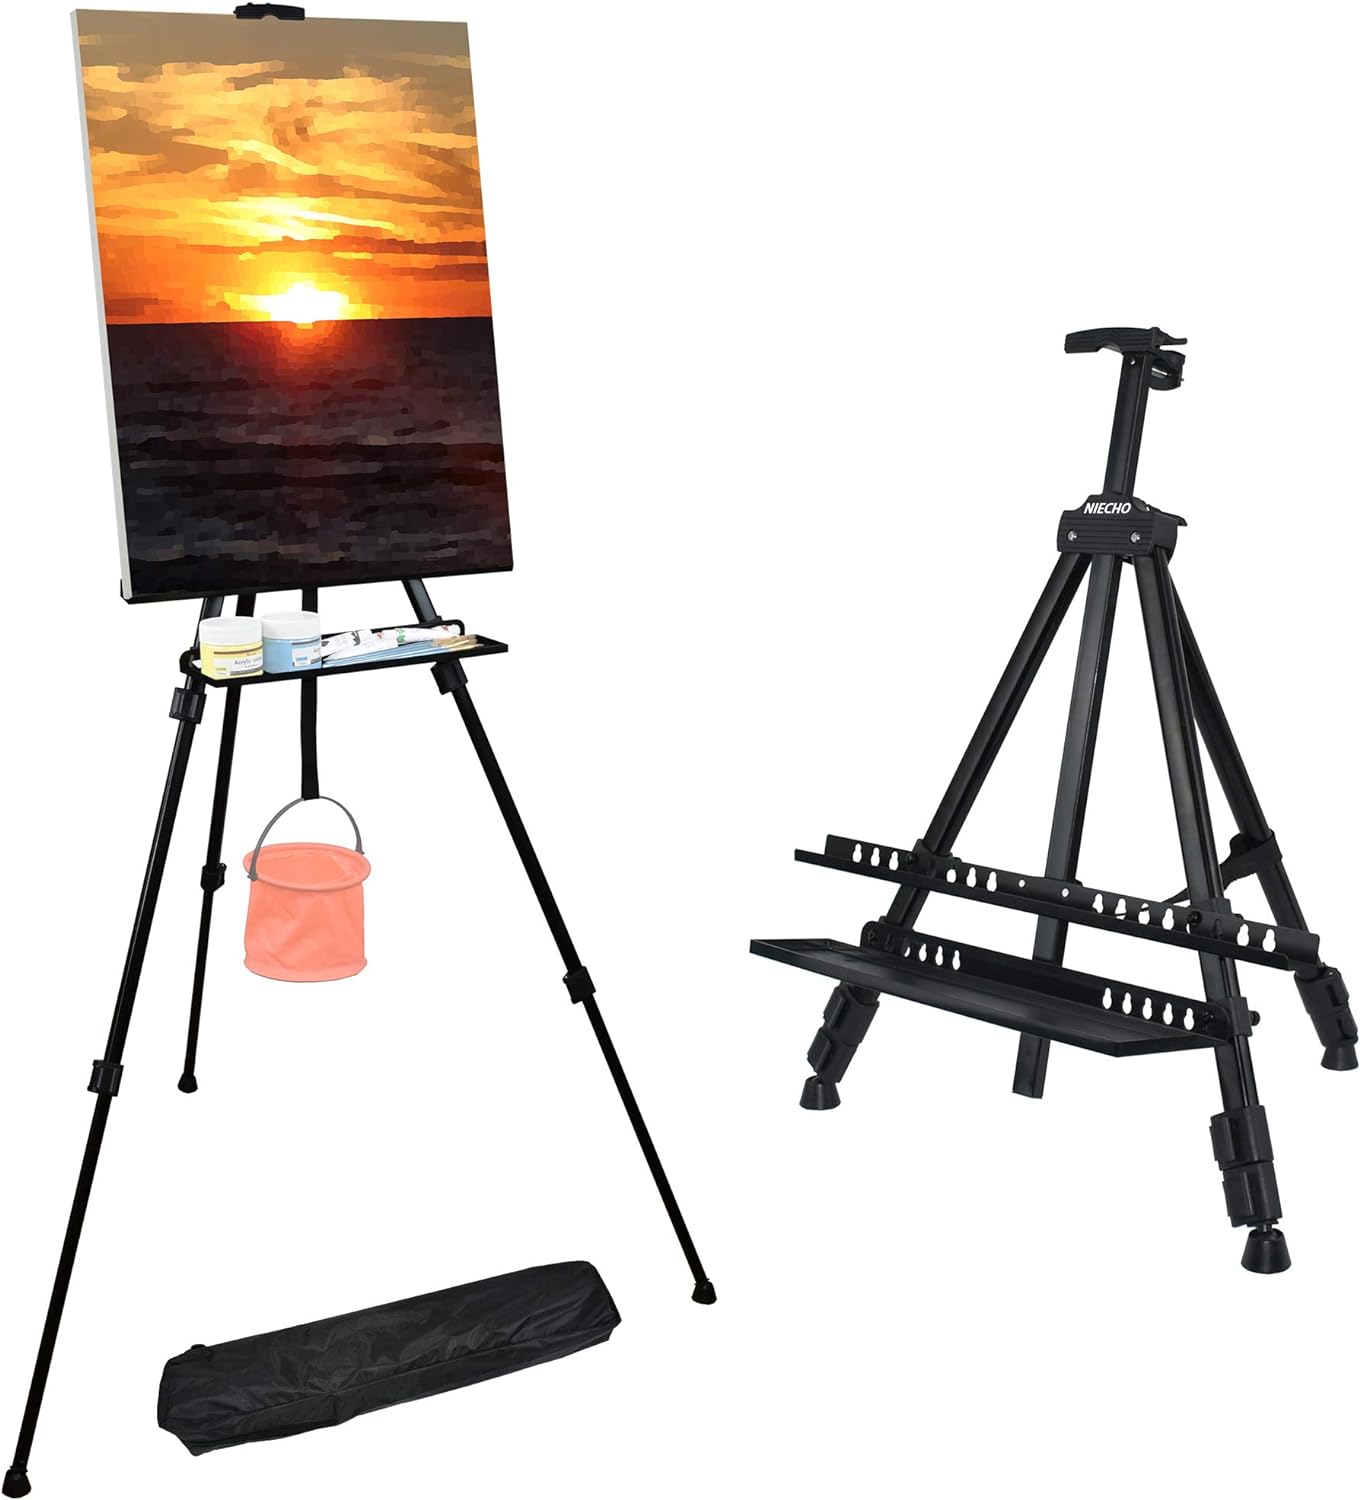 Buy NIECHO 66 Inches Easel Stand with Tray, Aluminum Metal Art Easel Artist  Tripod Adjustable Height from 21" to 66" with Carry Bag for Table-TopFloor  Painting and Displaying Online in Pakistan. B0872Z3VTS